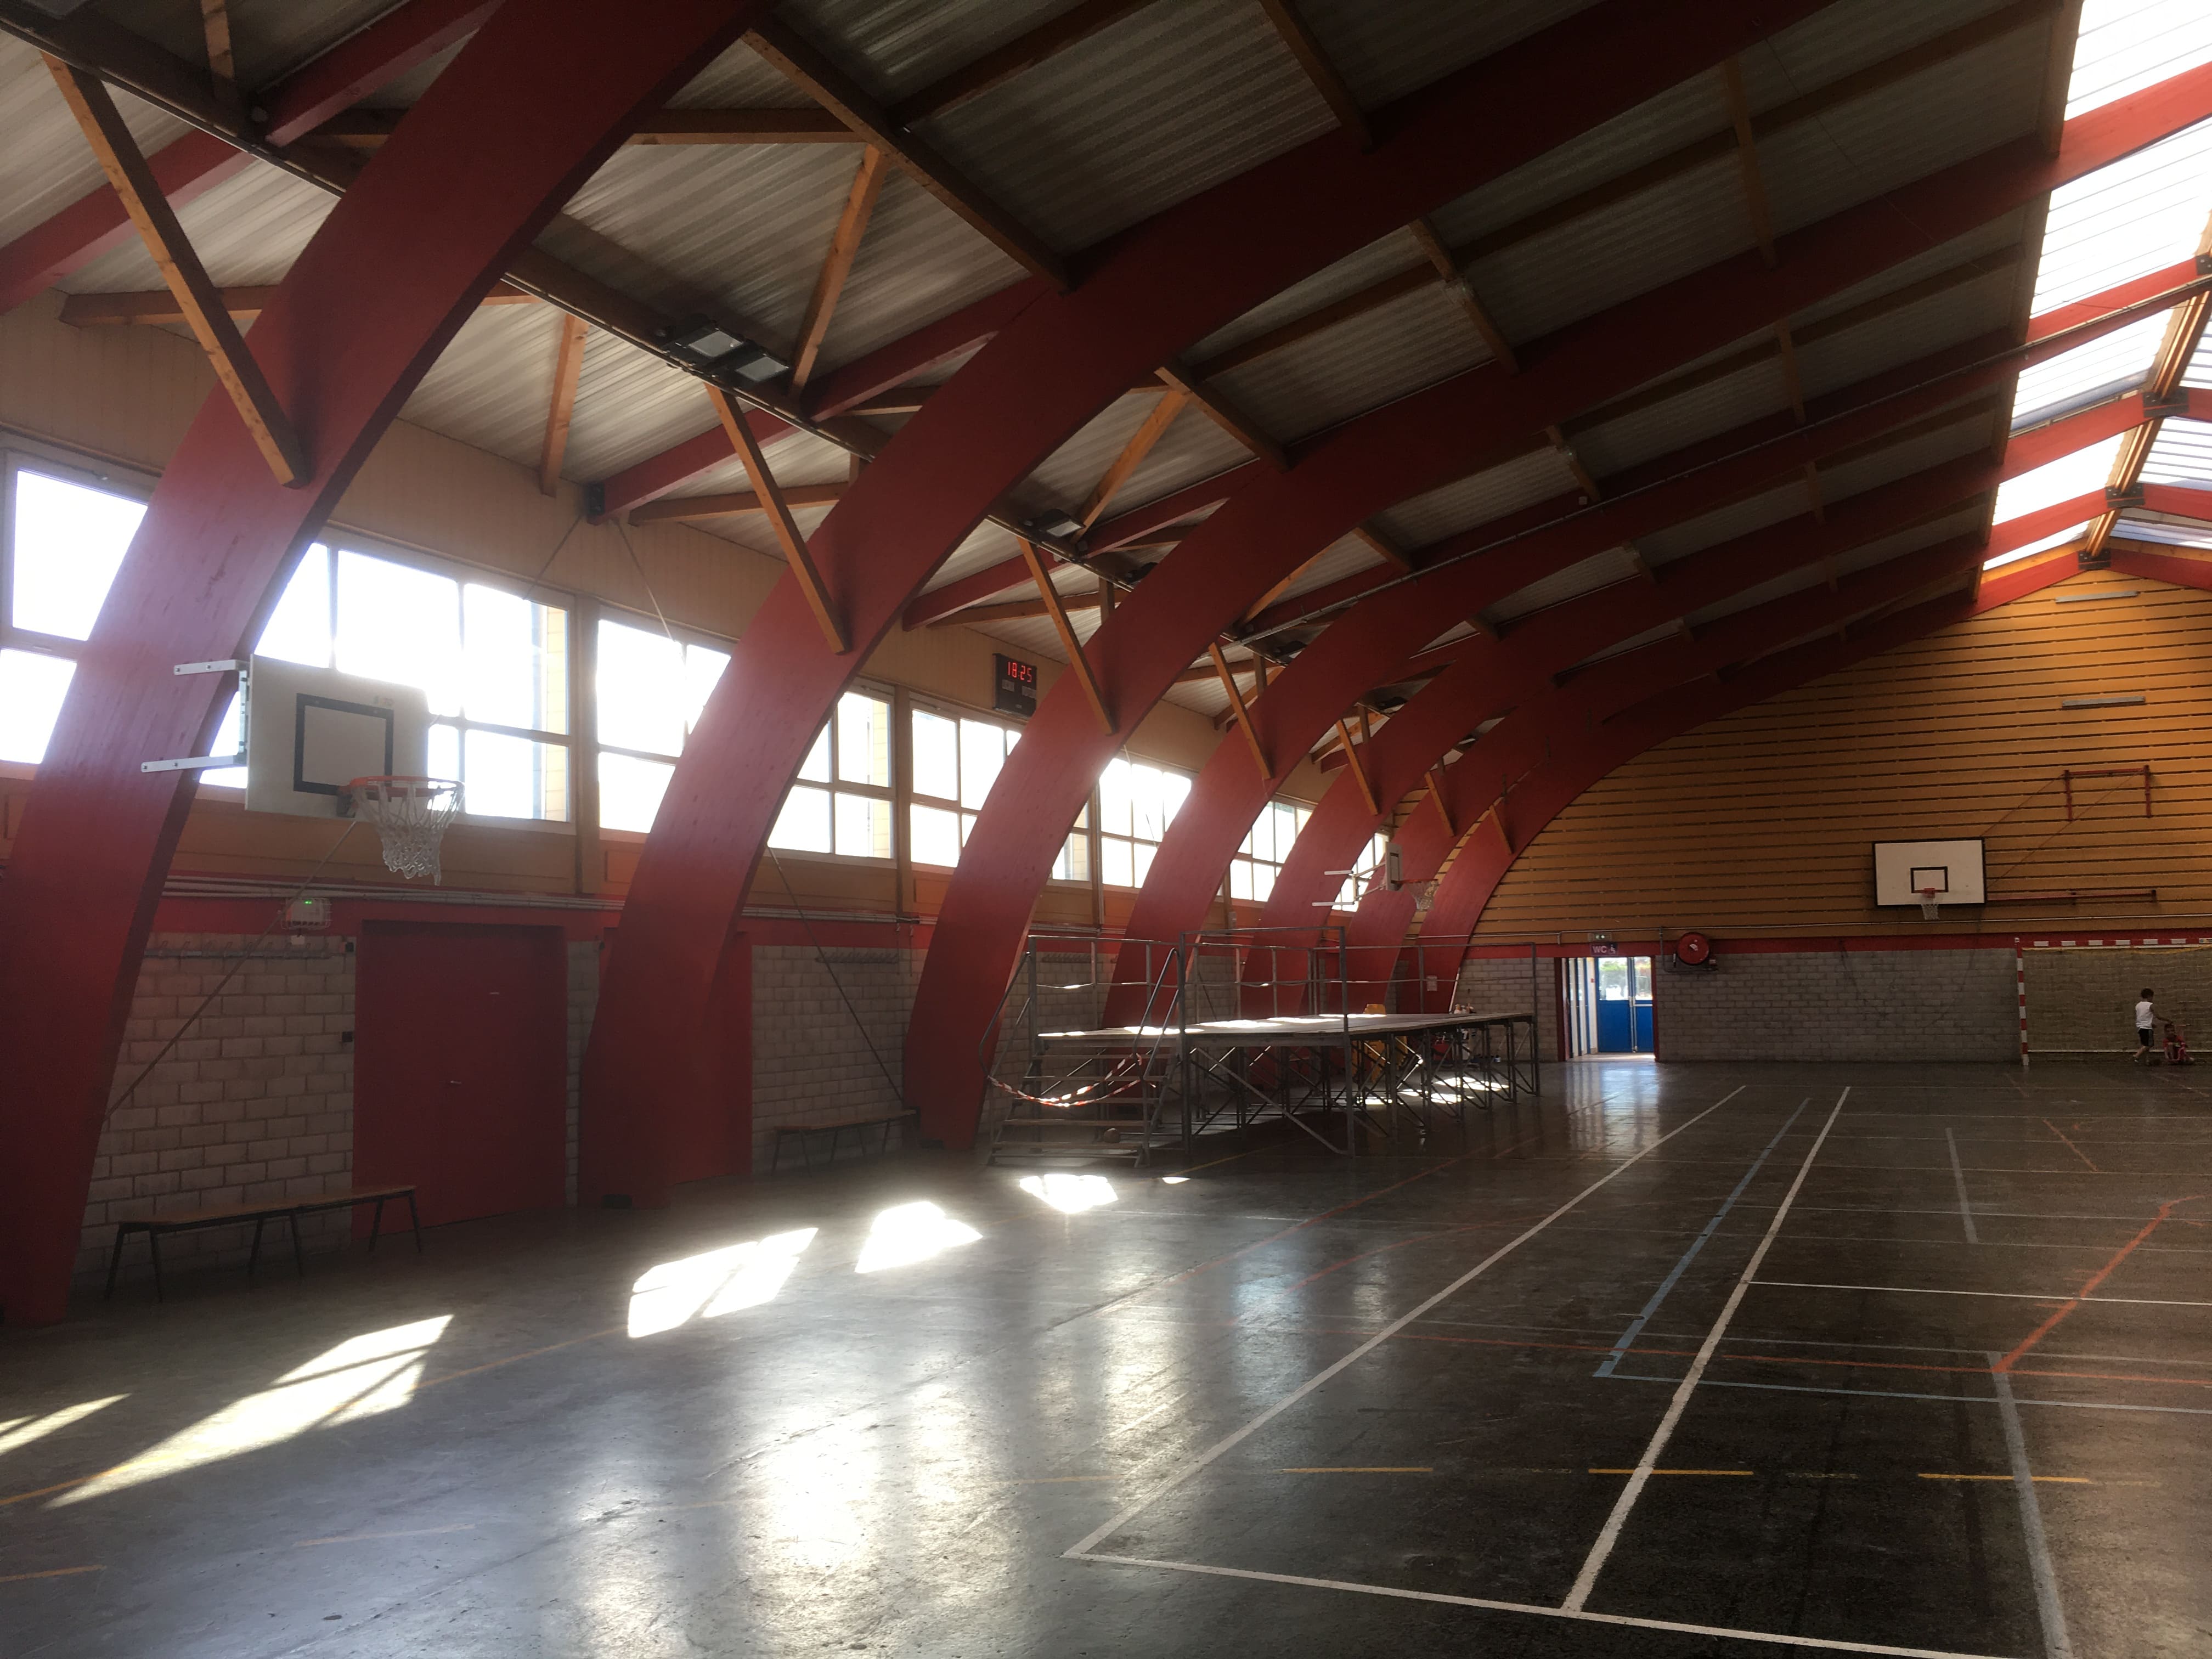 floodlight for the indoor basketball court